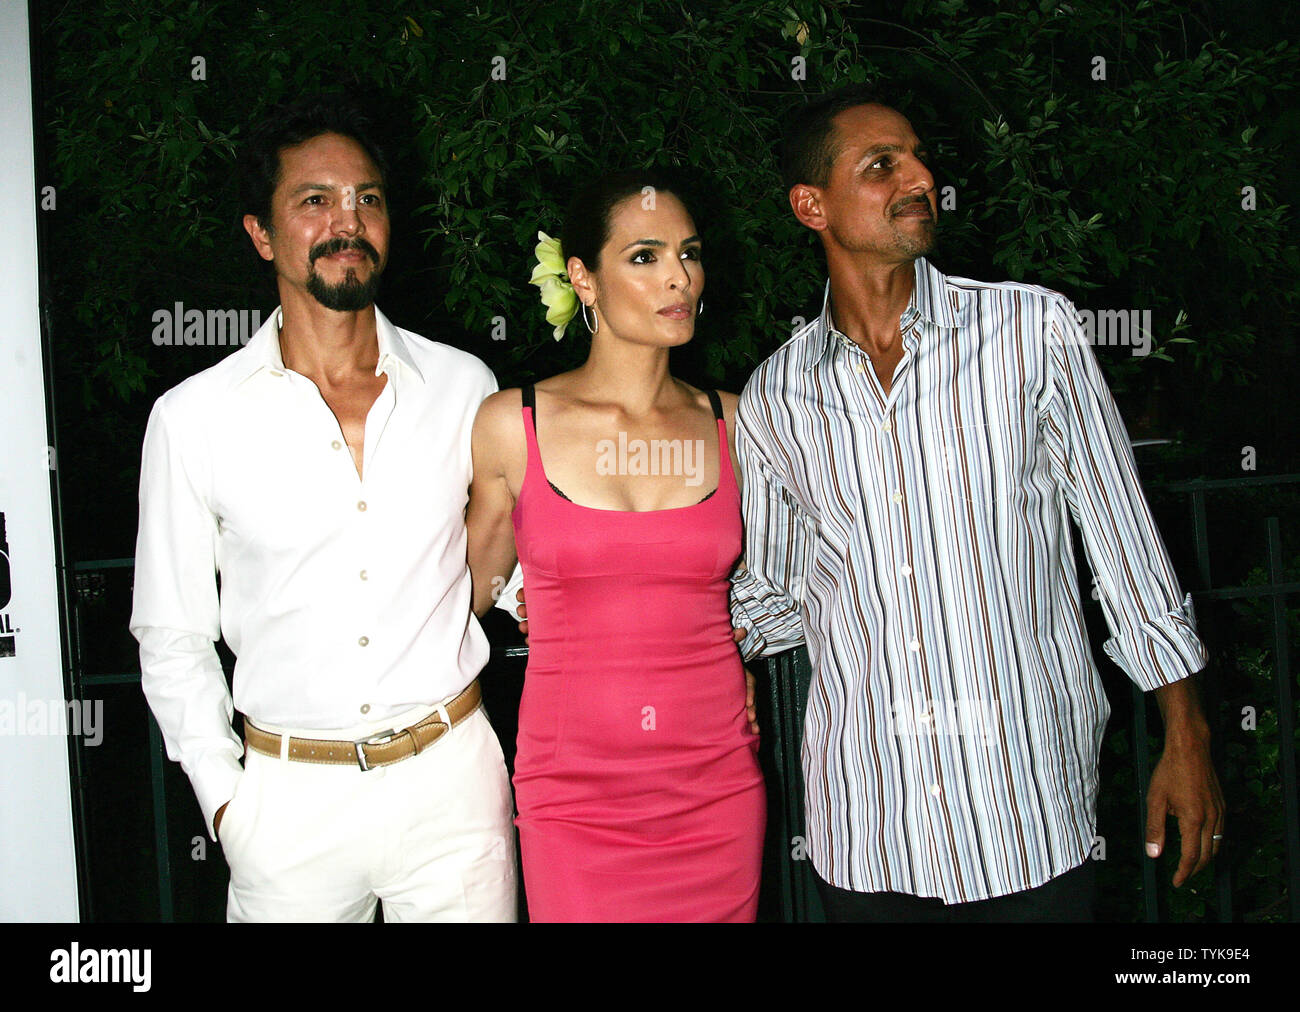 (L-R) Benjamin Bratt, wife Talisa Soto and brother Peter Bratt arrive for the 10th Anniversary of the New York International Latino Film Festival opening night premiere of 'LA Mission' at the School of Visual Arts Theater in New York on July 28, 2009.   (UPI Photo/Laura Cavanaugh) Stock Photo